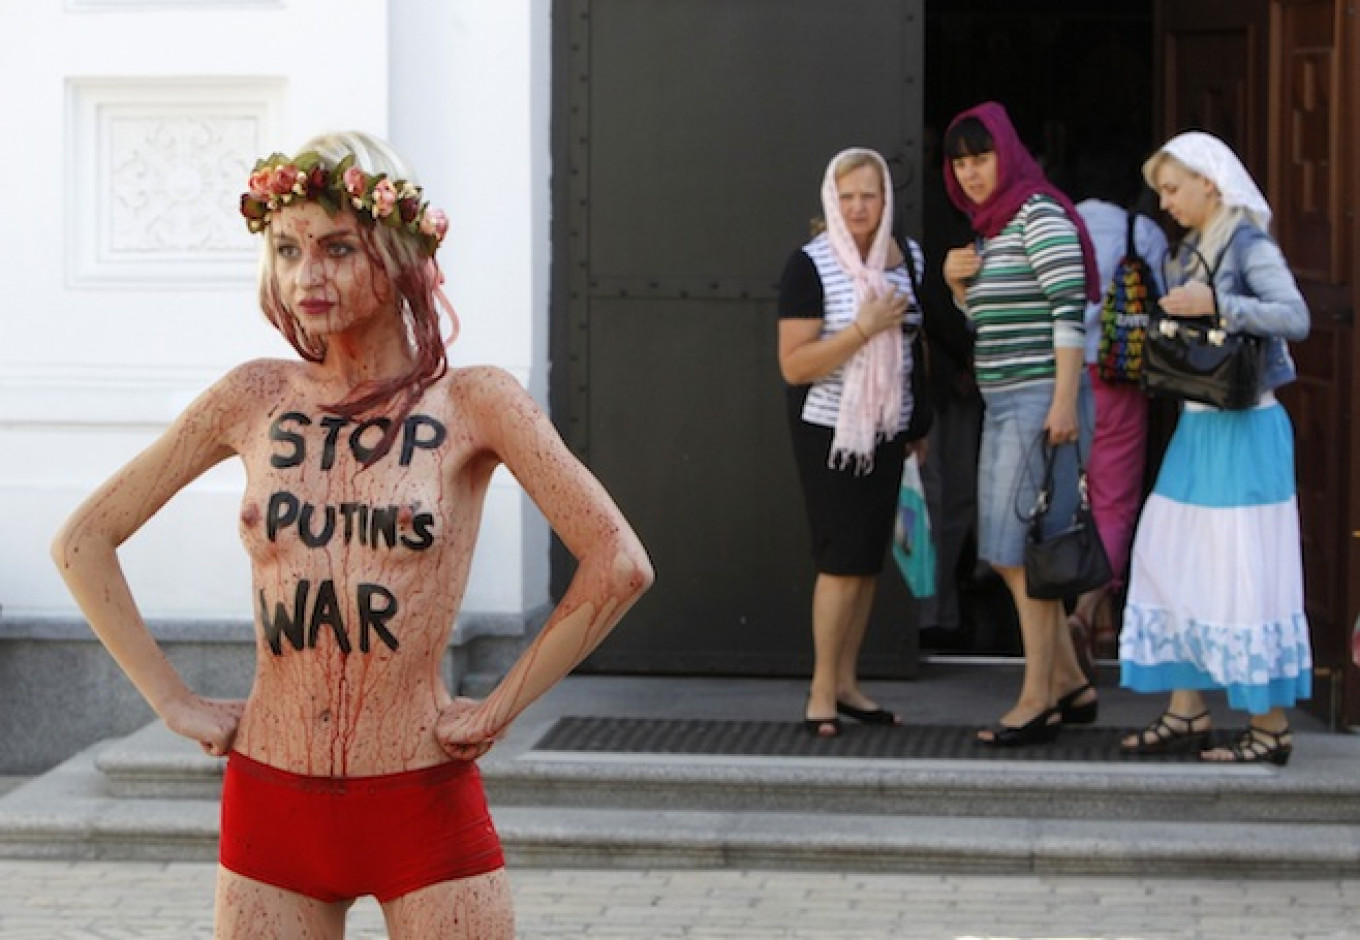 3 Women Fined Over Topless Protest In Moscow Were Not